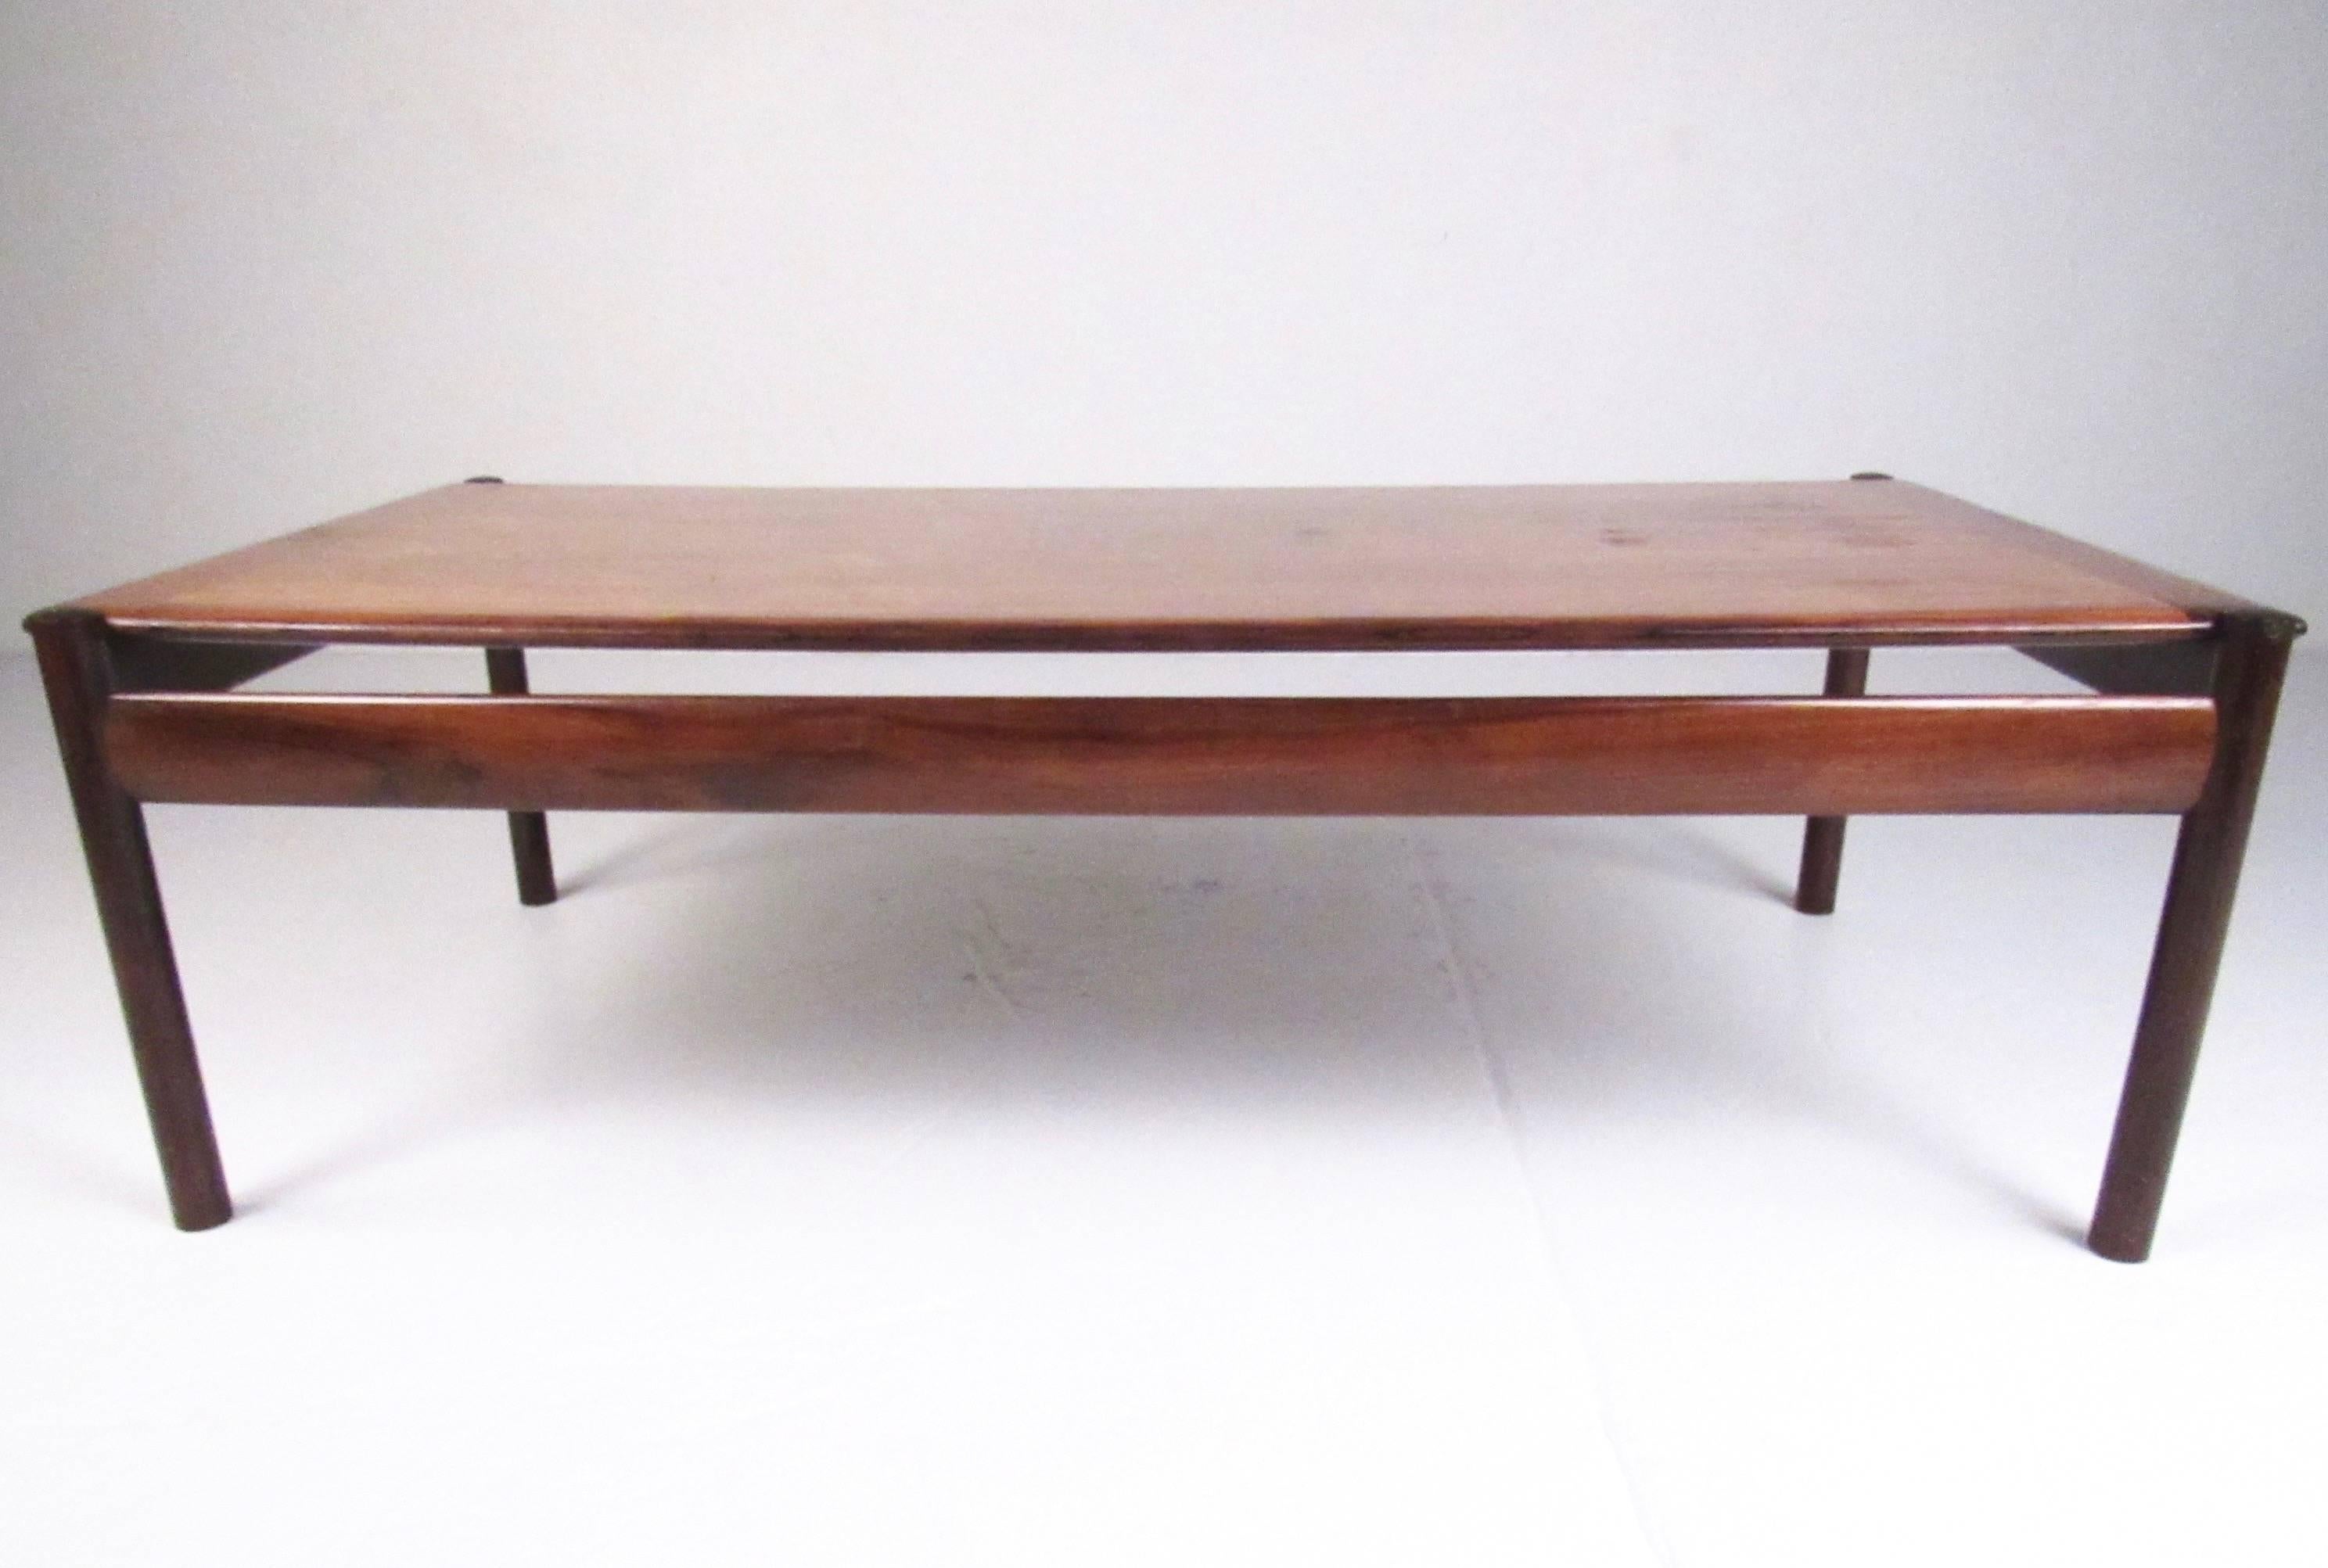 This stunning Mid-Century coffee table features high-quality design by Sven Ivar Dysthe for Dokka of Norway. Rich rosewood finish and carefully crafted design make this an impressive addition to any seating area. Please confirm item location (NY or